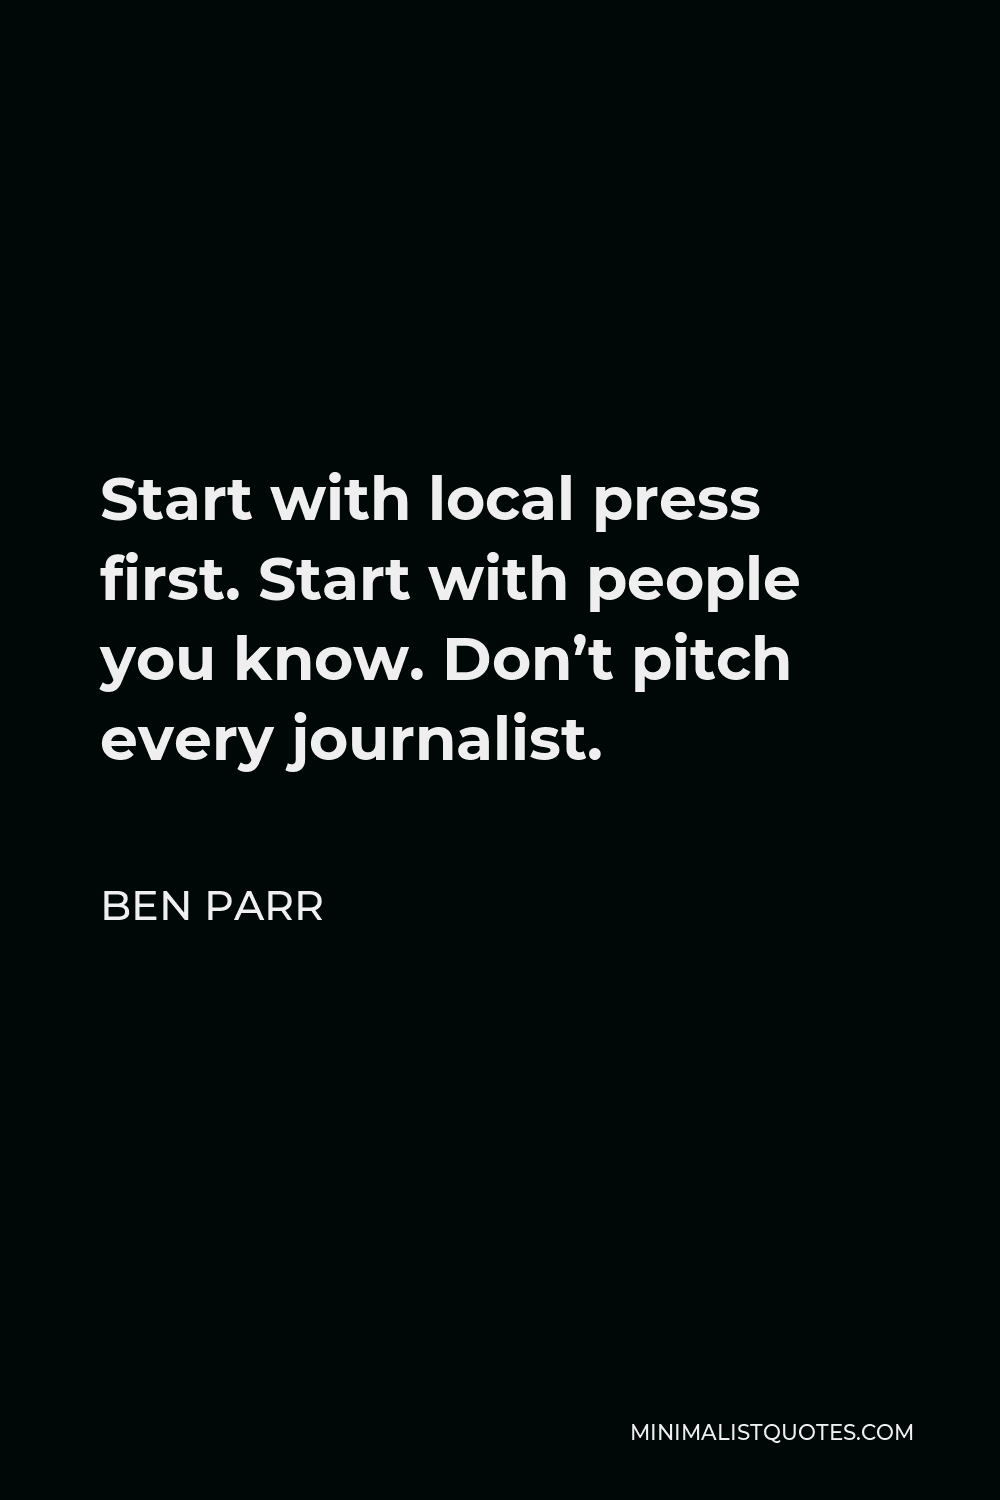 Ben Parr Quote - Start with local press first. Start with people you know. Don’t pitch every journalist.